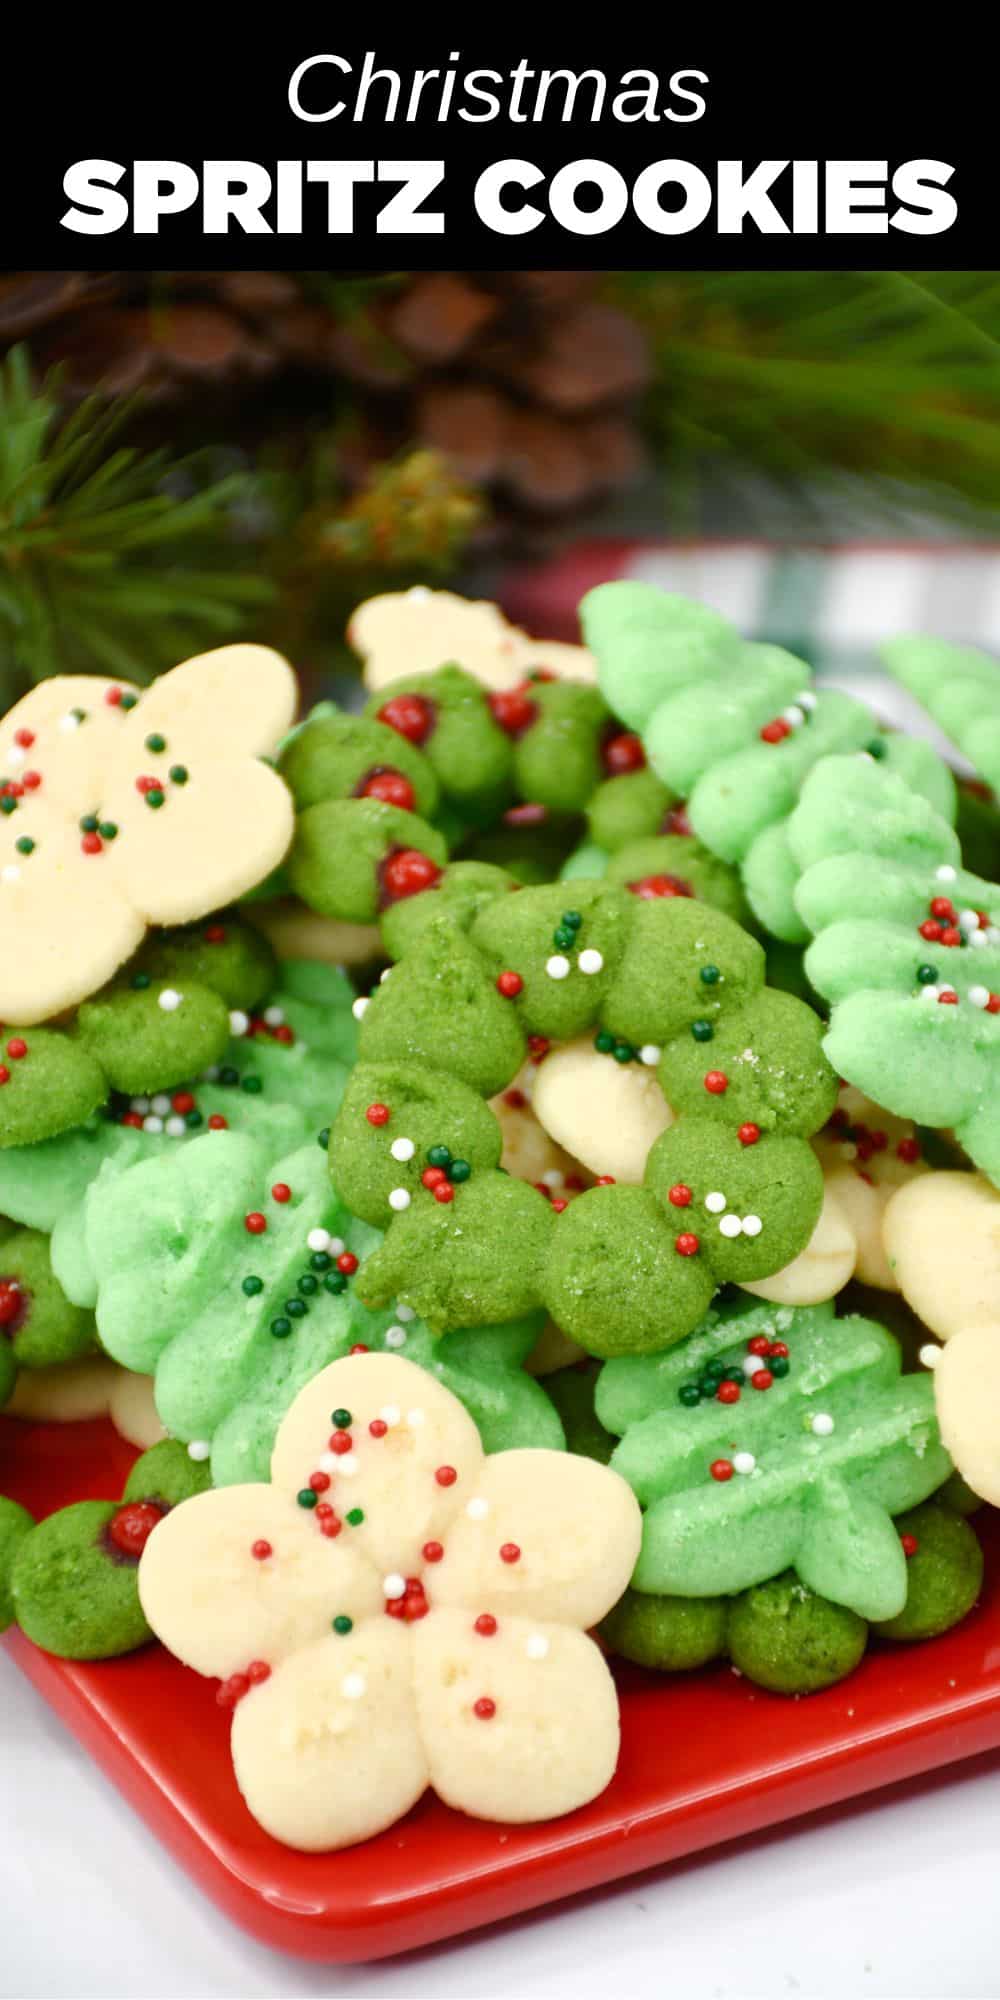 Delight in our buttery German Spritz Cookies — a perfect addition to your holiday table. Easy to make, fun to decorate, and utterly delicious!